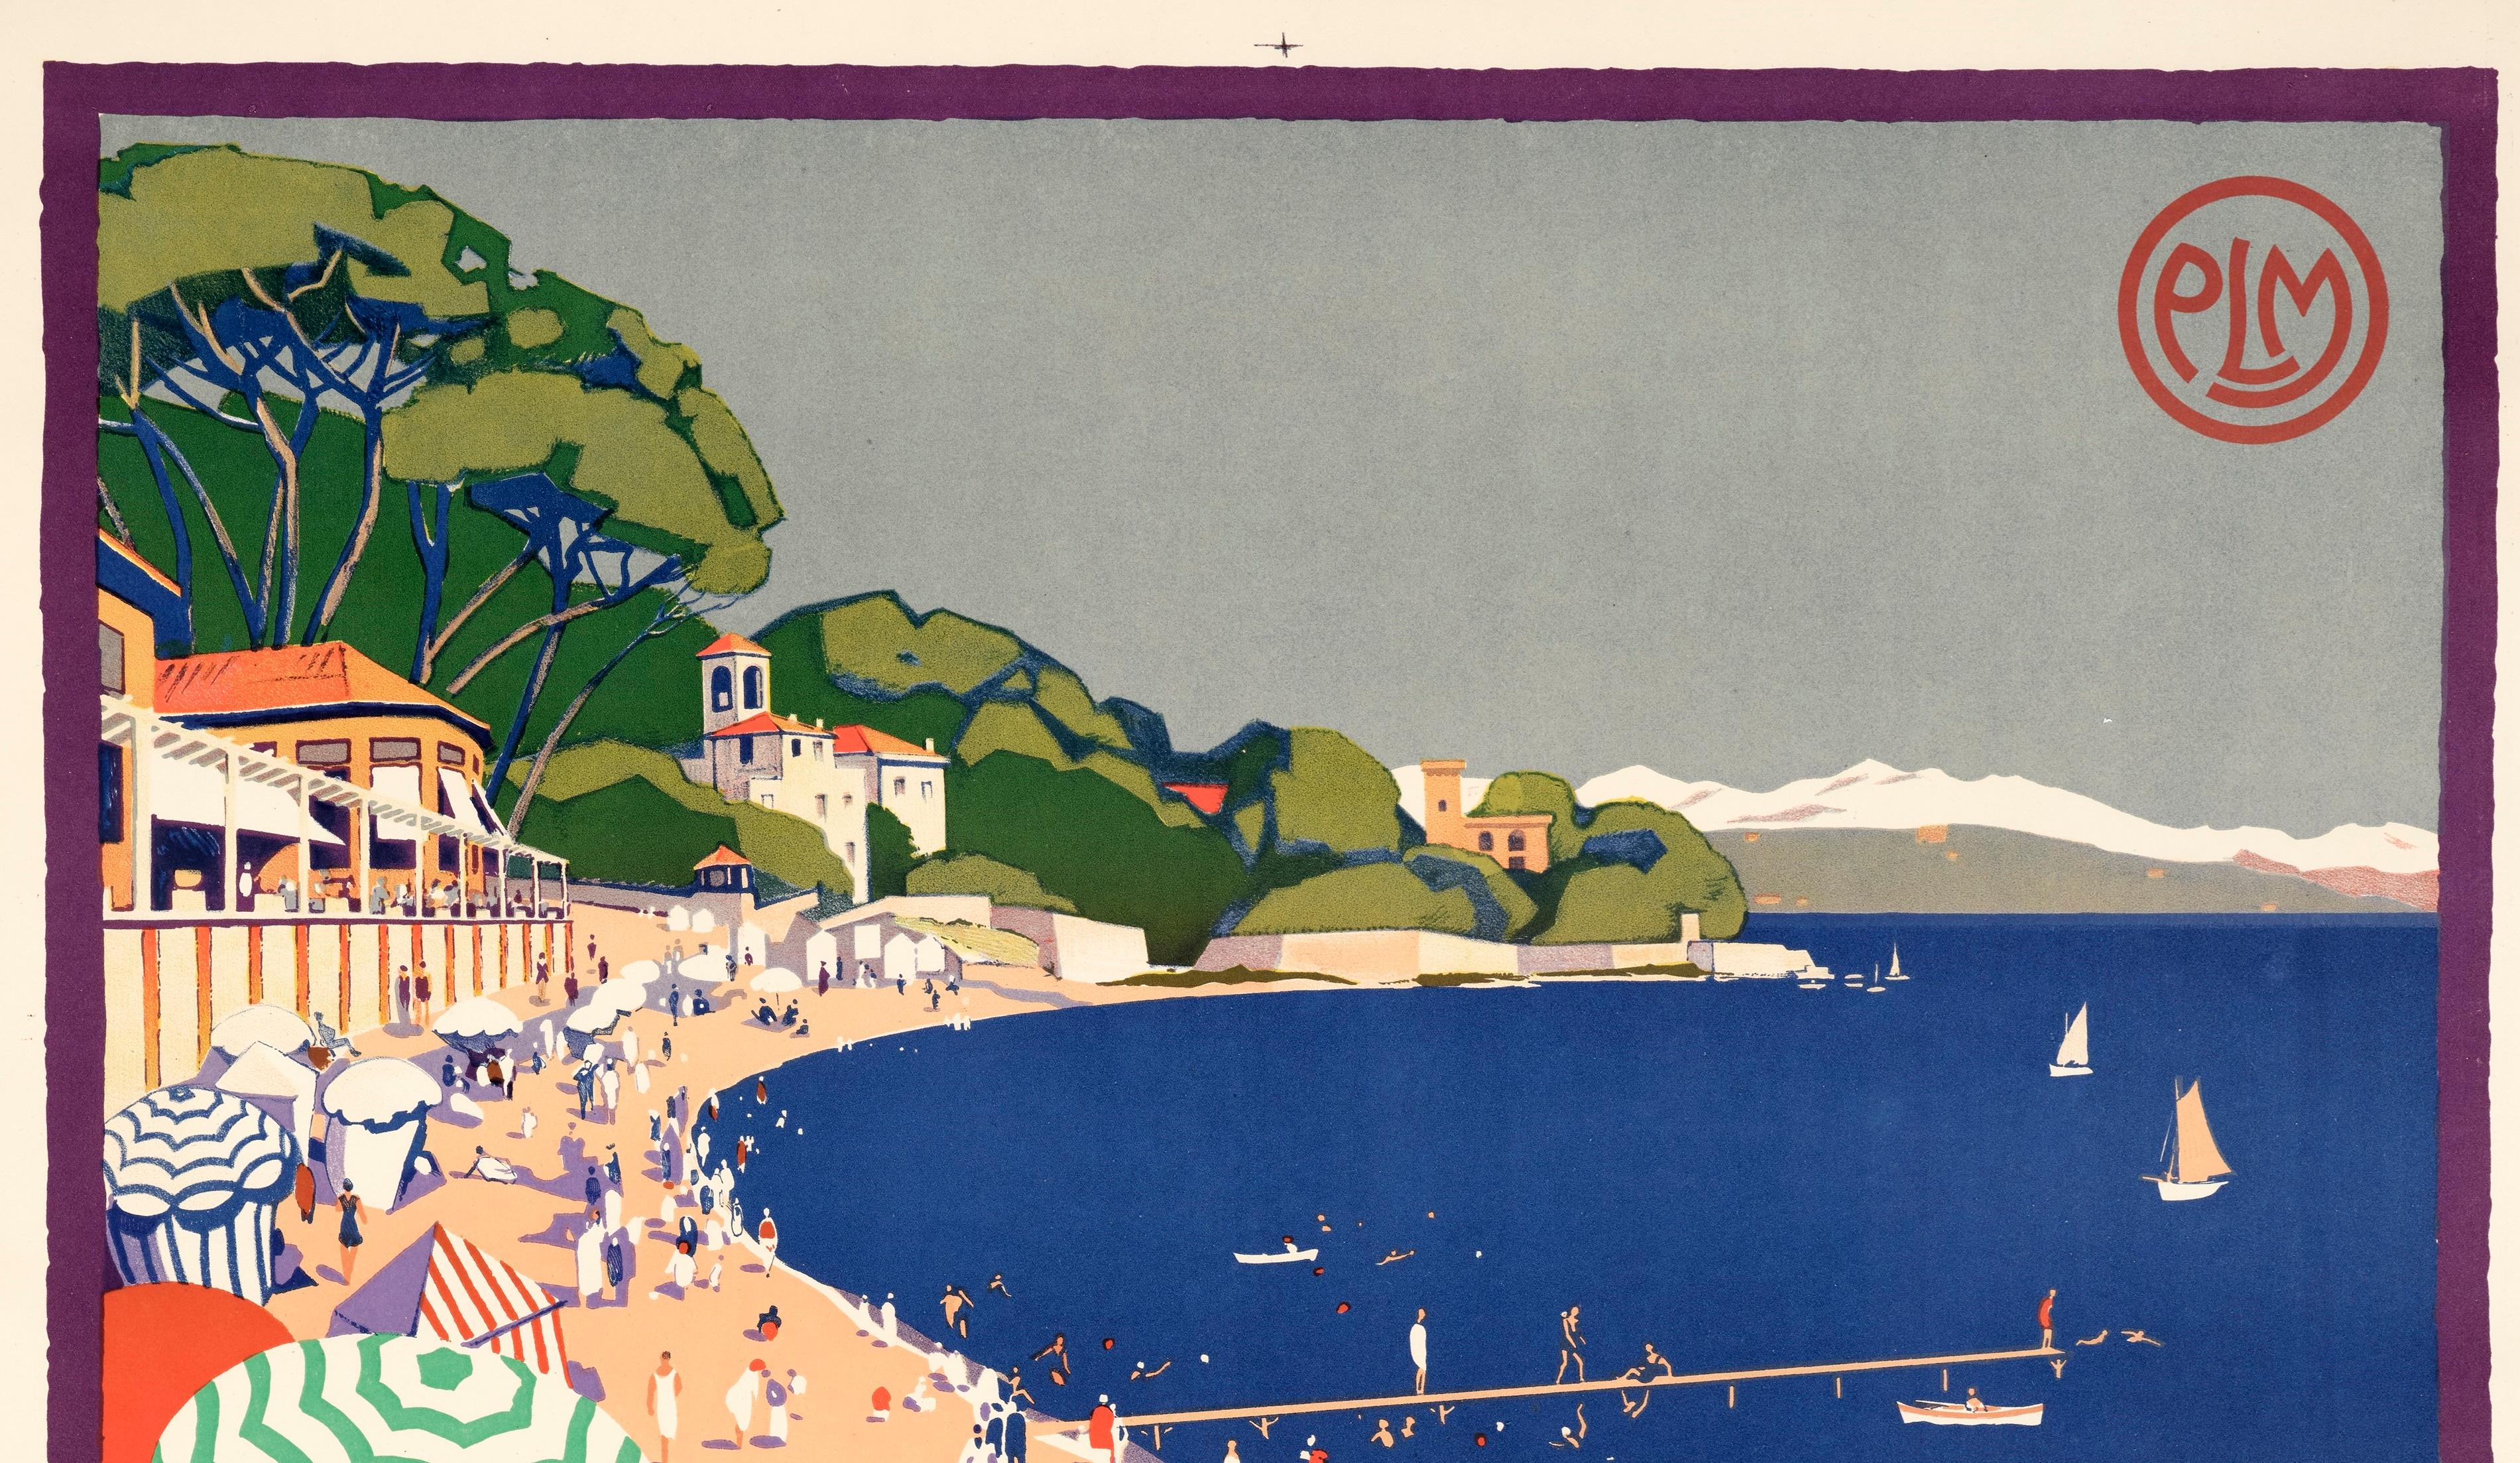 P.L.M. poster created by Roger Broders in 1928 to promote tourism on the French Riviera, particularly in Antibes and on the beach of Juan-Les-Pins.

Artist: Roger Broders (1883-1953)
Title: Antibes, sa plage de Juan les Pins, son Cap, station d’été